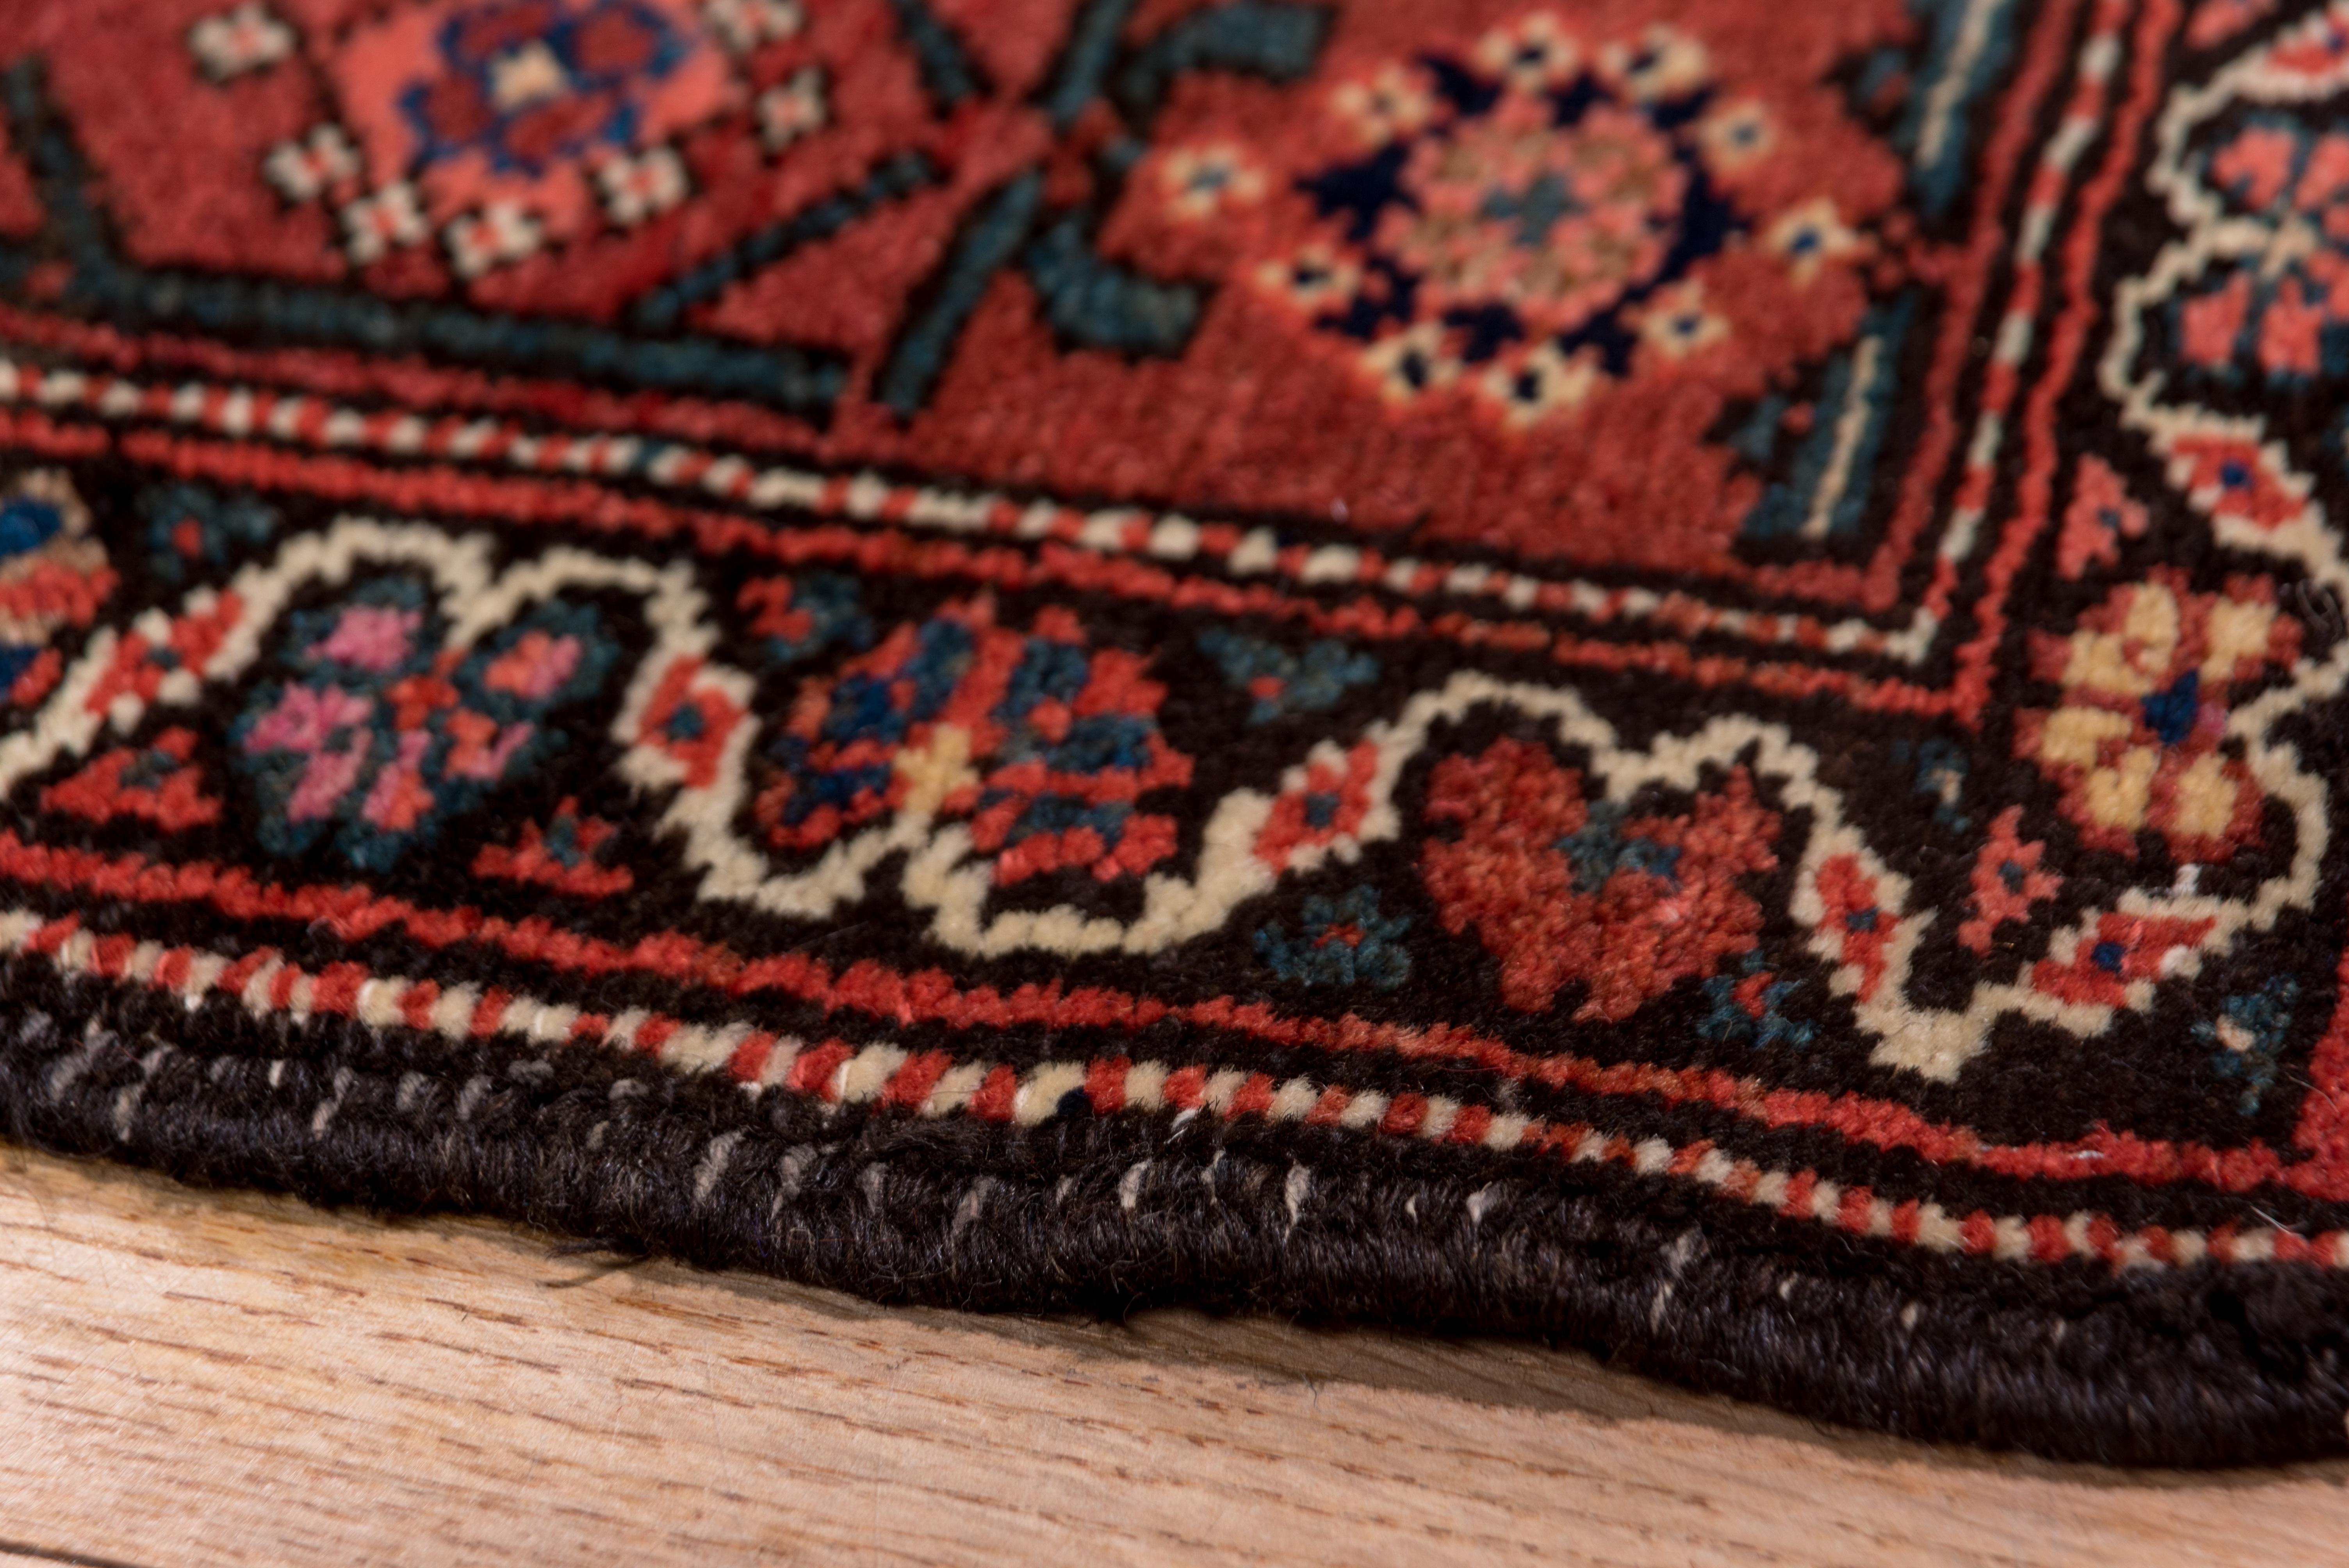 Malayer weavers love bottehs and the abrashed came-rust field displays row upon row upon offset and reversing row of floriated bottehs touched in navy, dark blue, cream and green. Red border with bracketed rosettes and slanted serrated leaves.